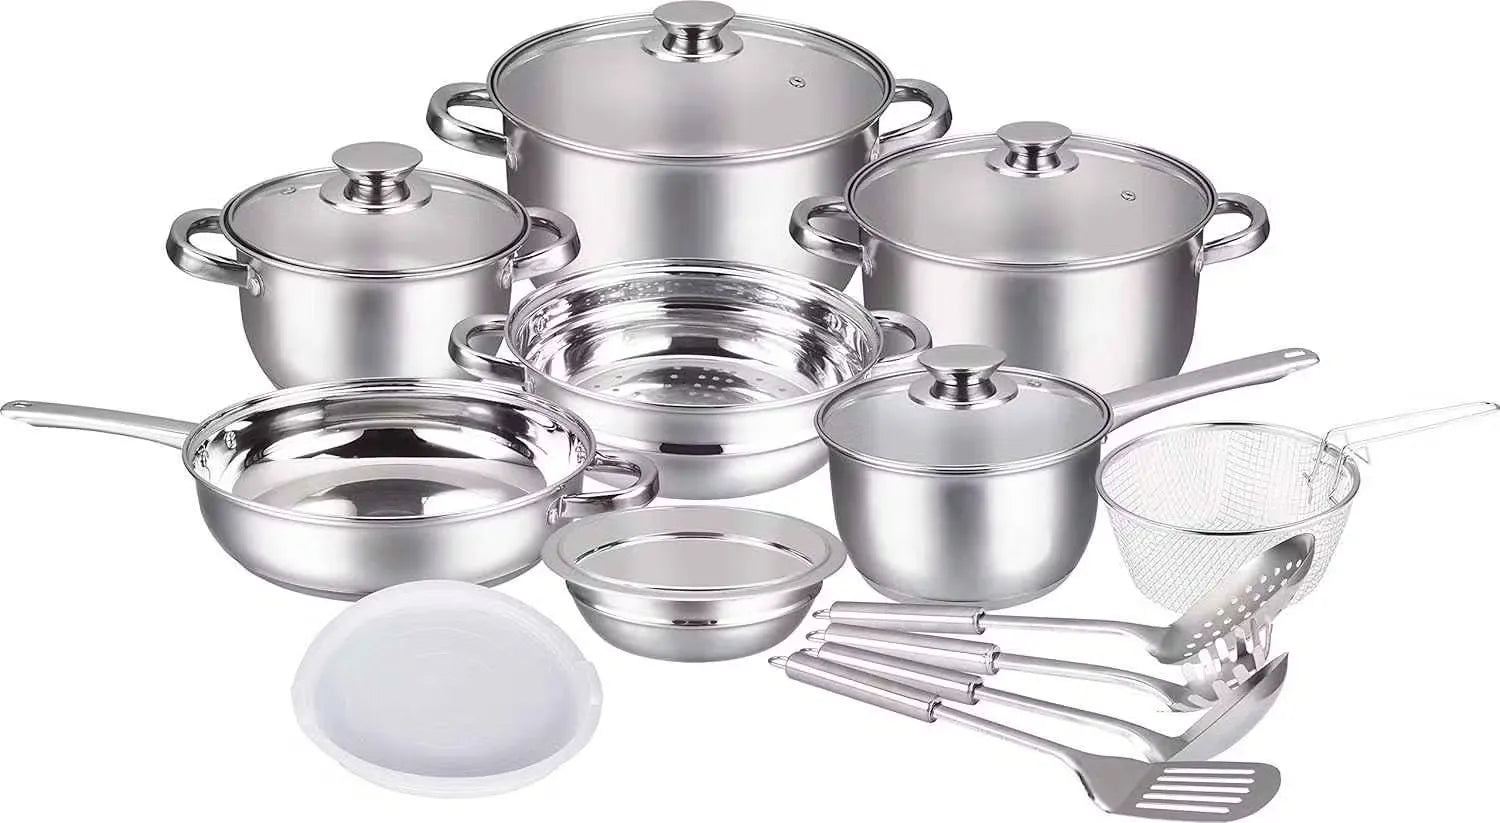 Insiya SV15 Stainless Steel 17pcs Cookware Set Induction Ready